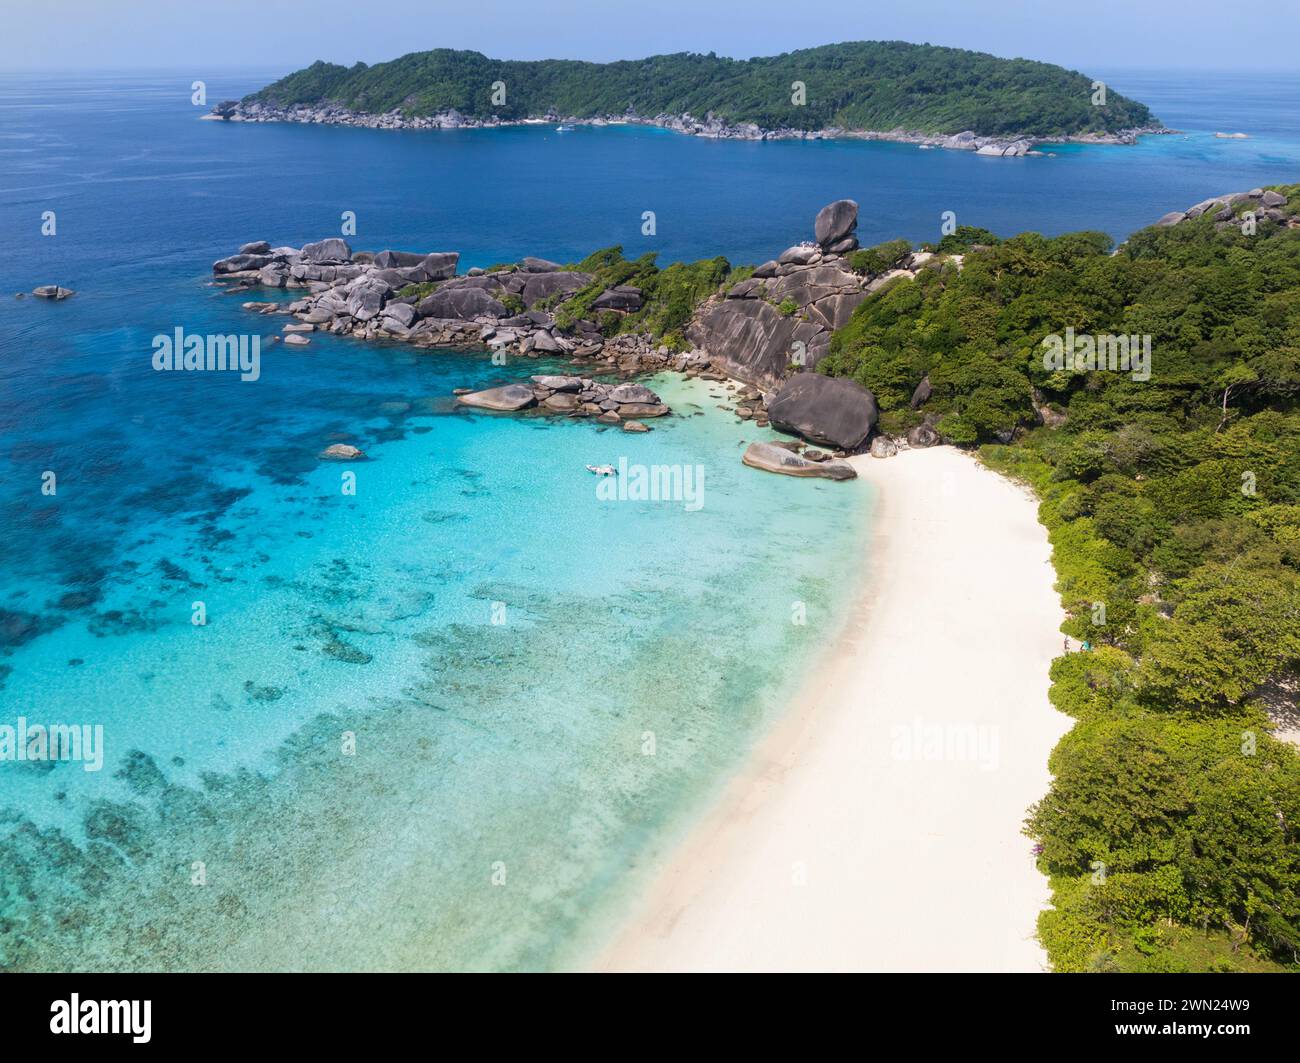 Aerial view of Similan Island in the Andaman Sea, Thailand Stock Photo